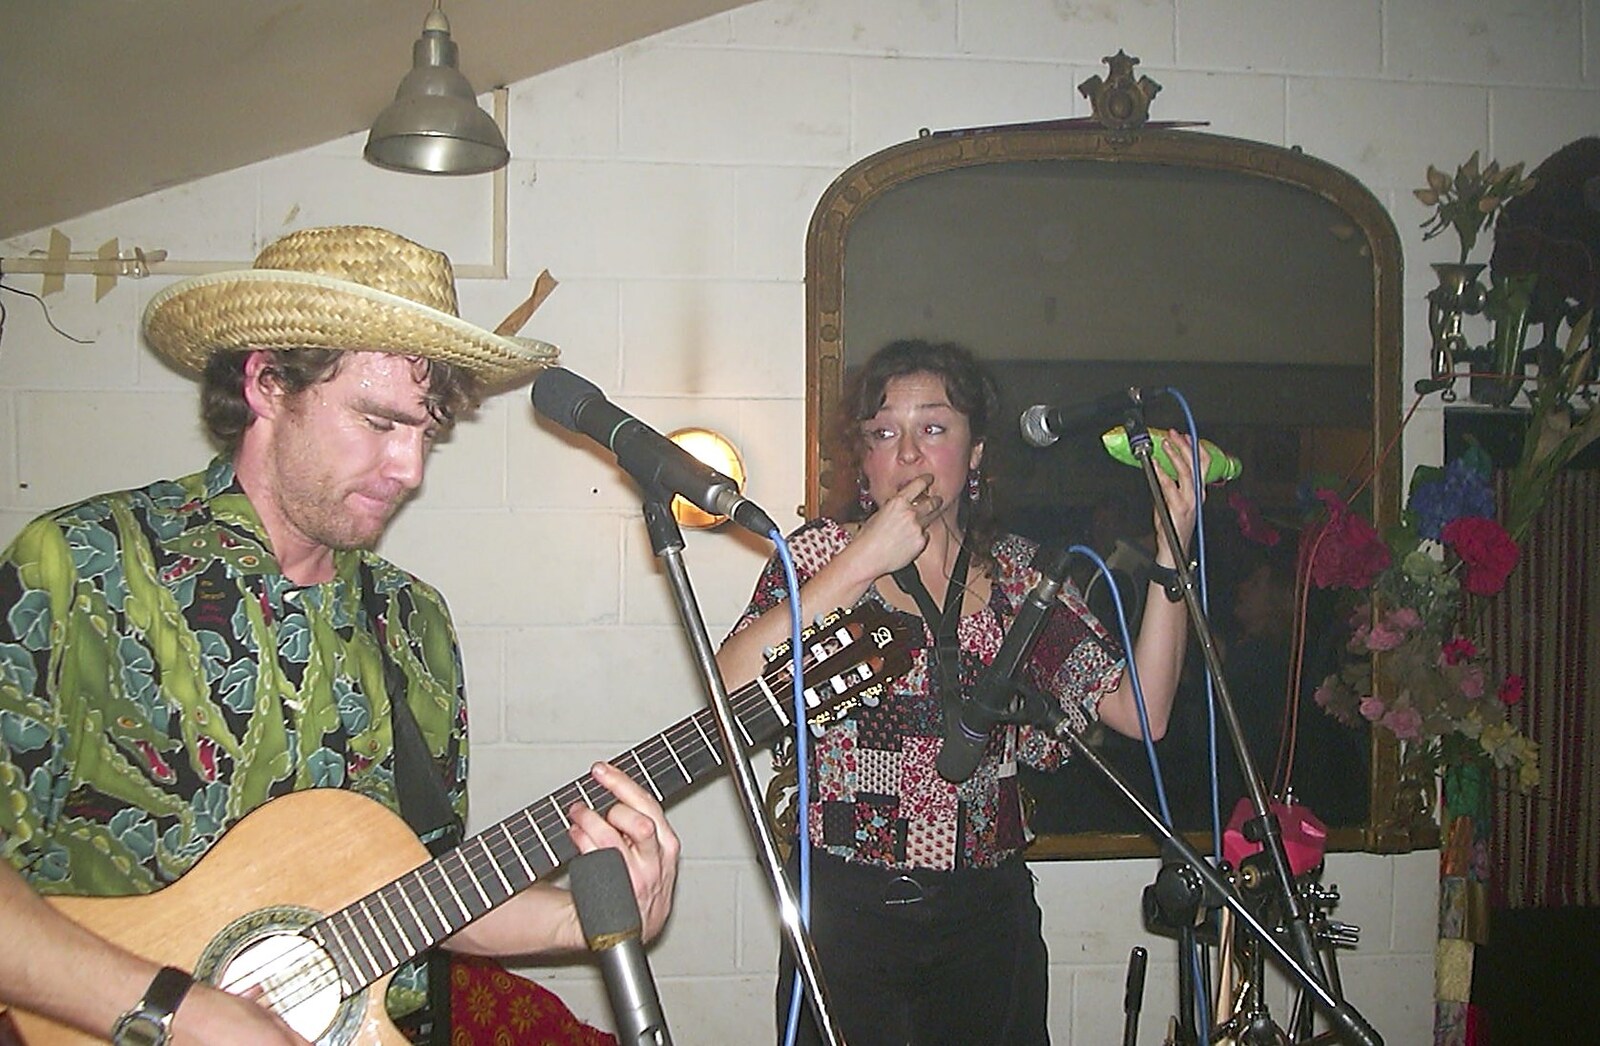 The band on stage at the Banham Barrel from The Swan's Cellar, and Bill's Mambo Night at the Barrel, Banham, Norfolk - 6th February 2004